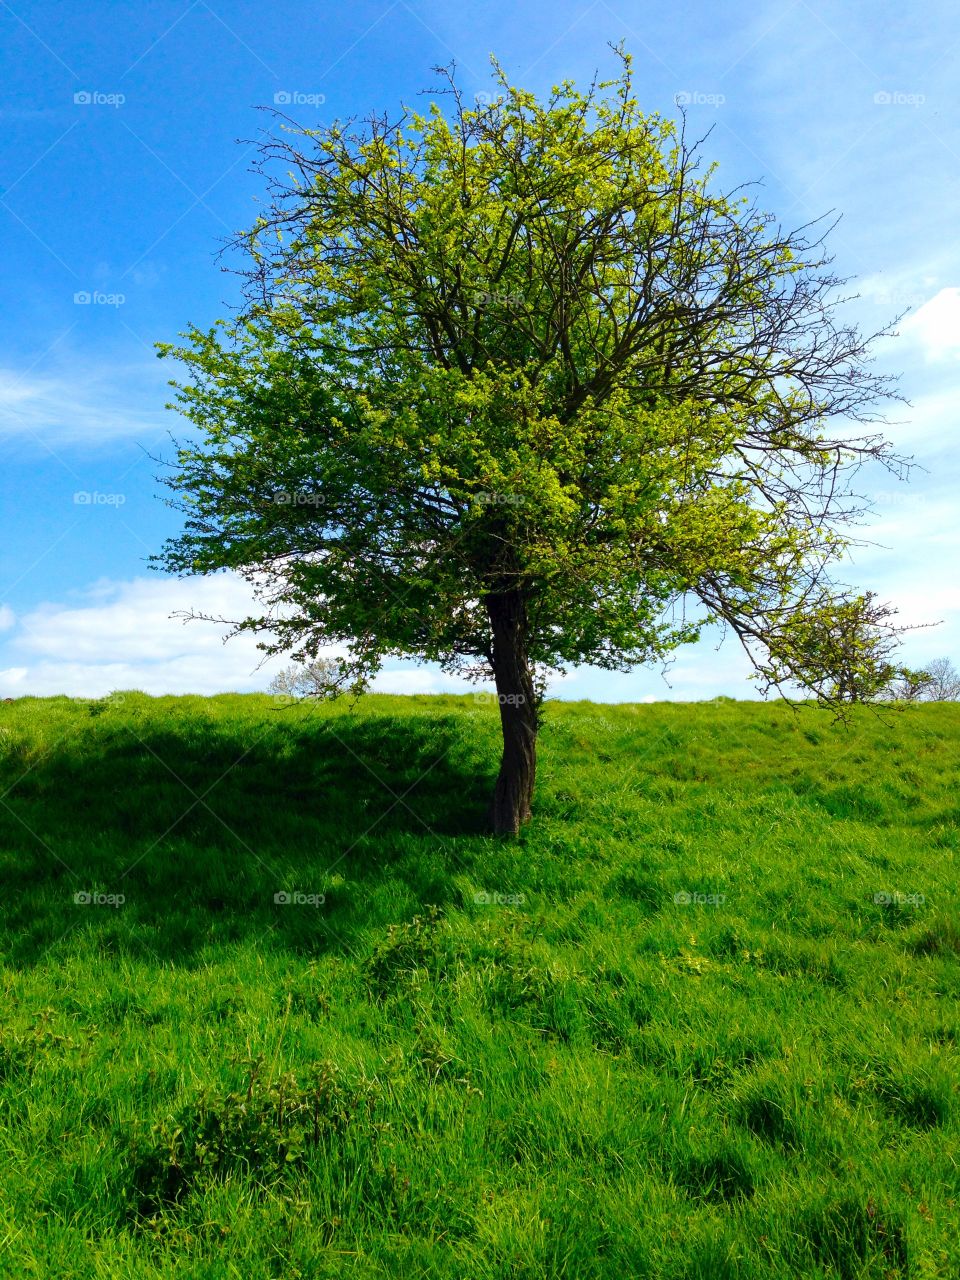 Lone tree. Lone tree in a lush green field and bright blue sky